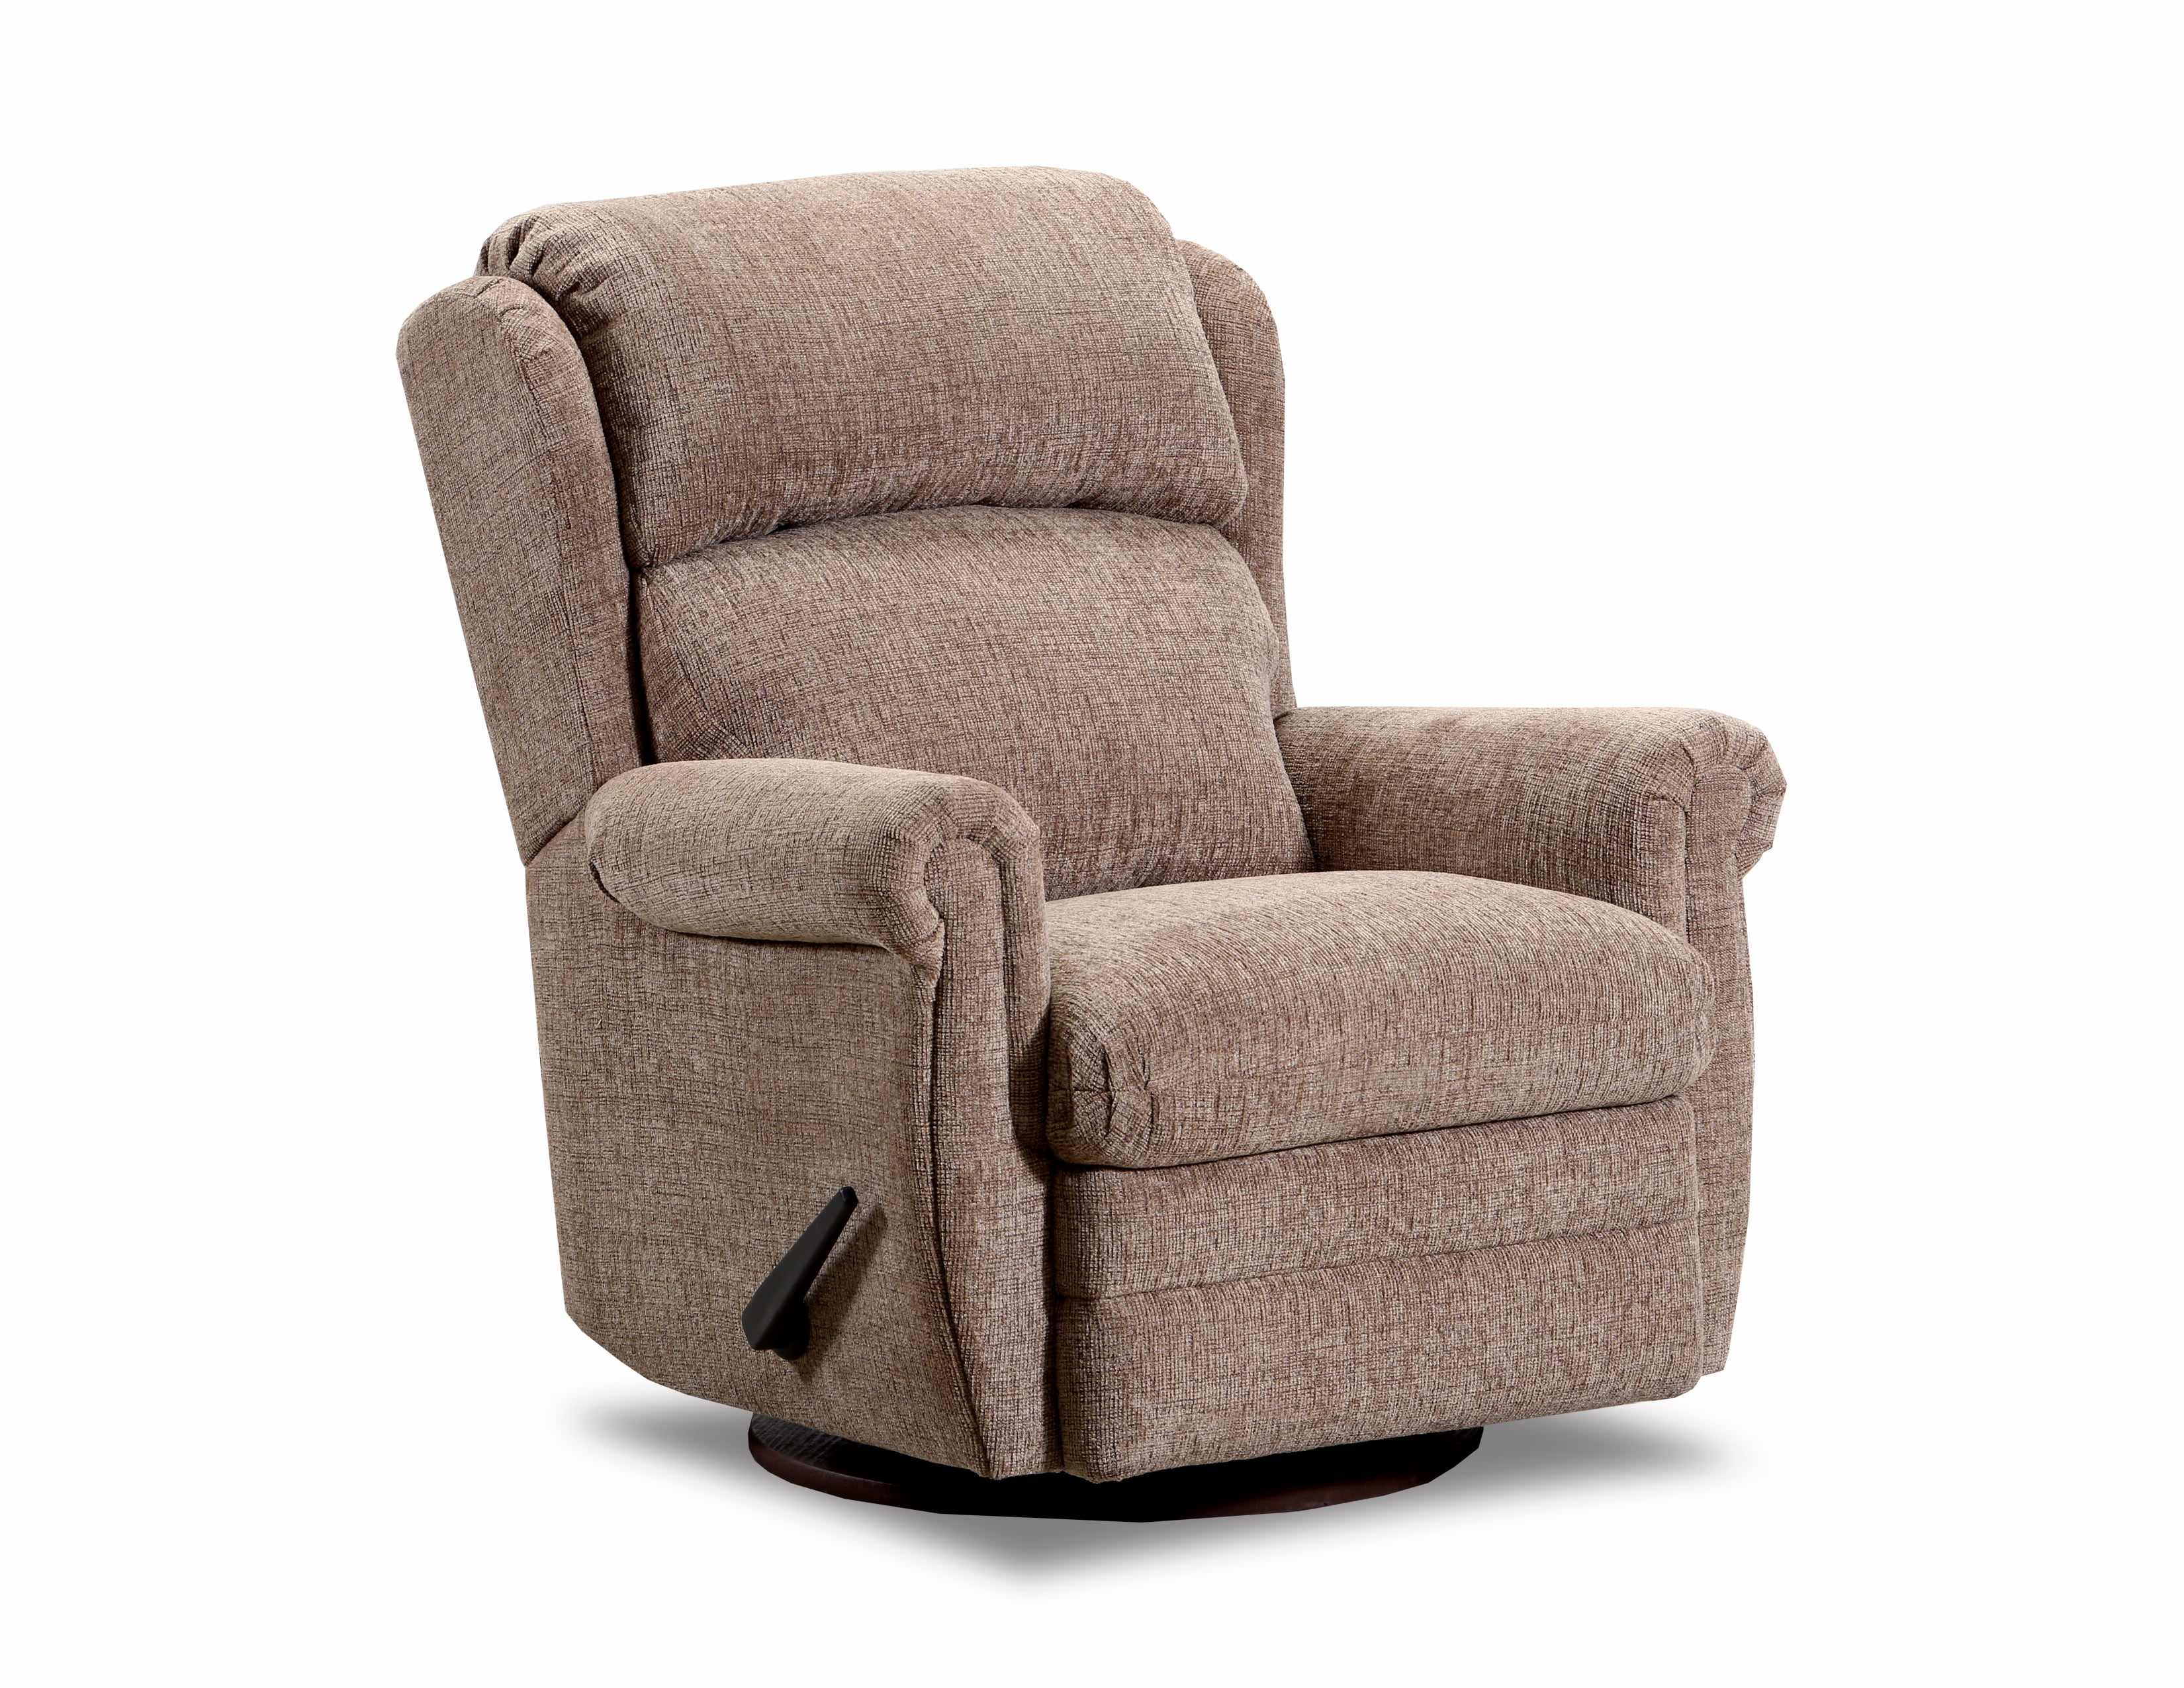  Rocking Recliner Chair Walmart with Simple Decor